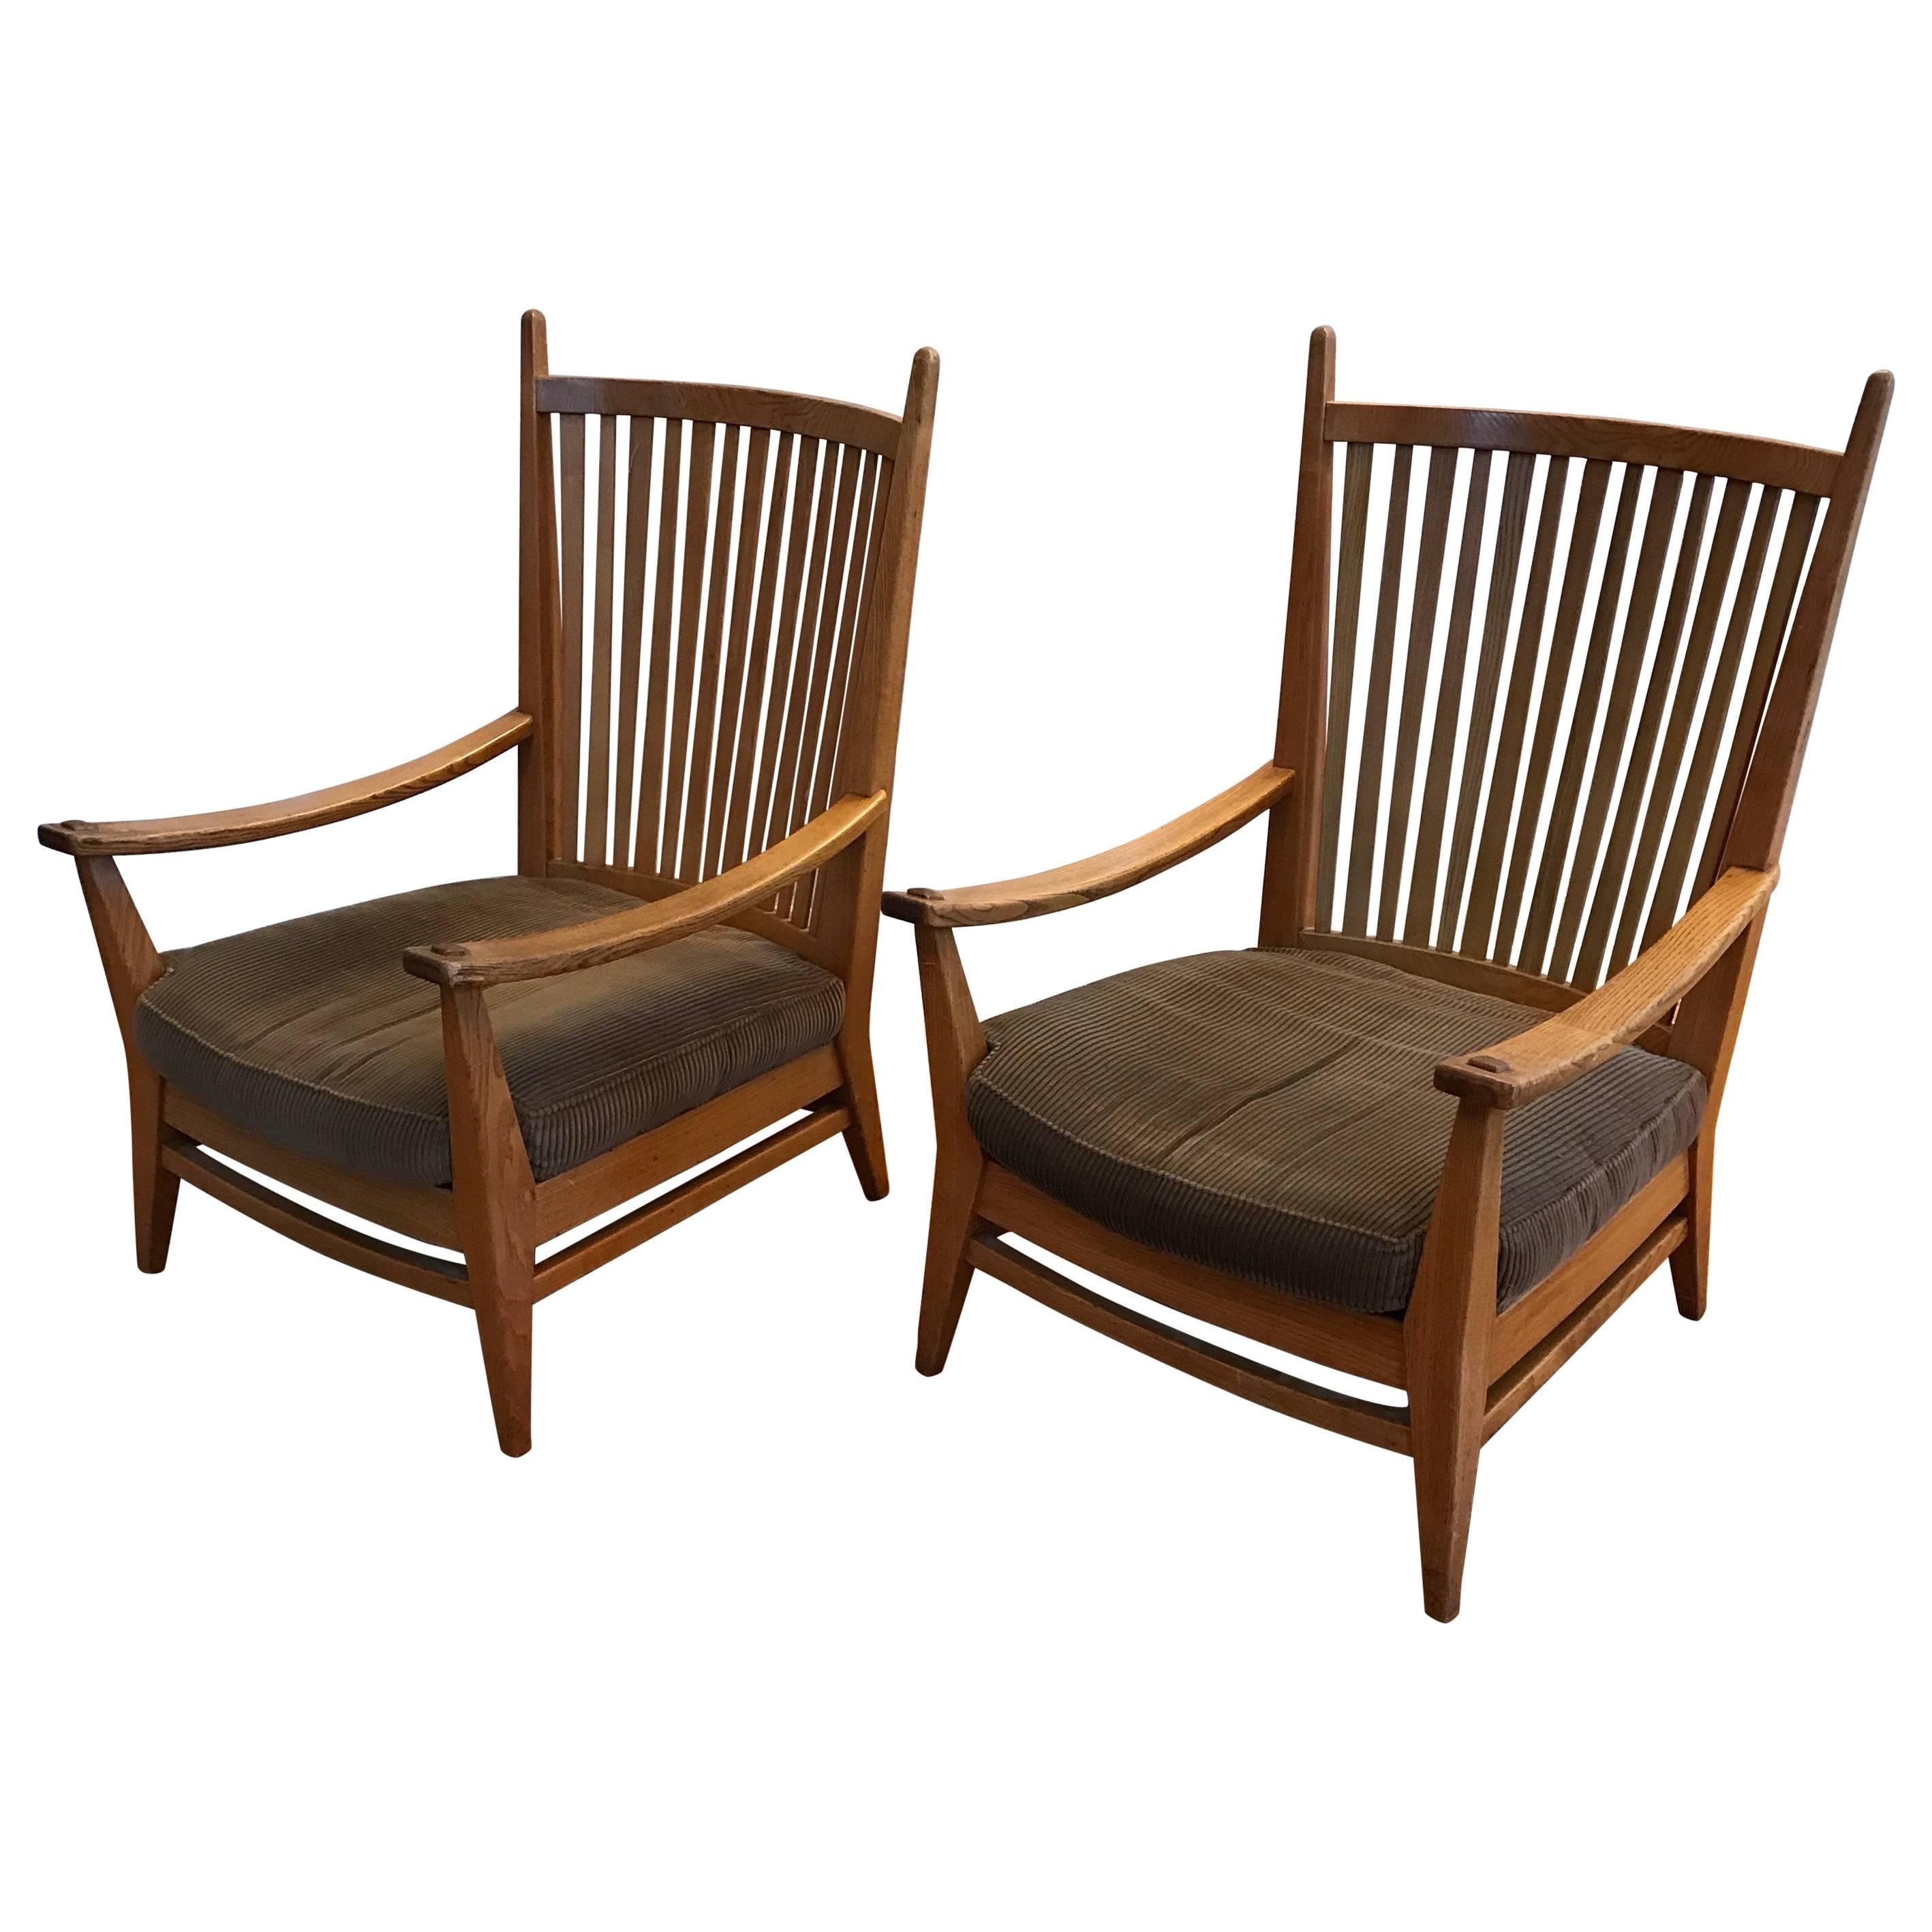 Dutch Arts and Crafts design, elegant oak lounge chairs.

These very stylish chairs are made by Dutch design icon Bas Van Pelt and they are in excellent condition. The handcrafted oak frame and the high backs give these chairs lots of character.